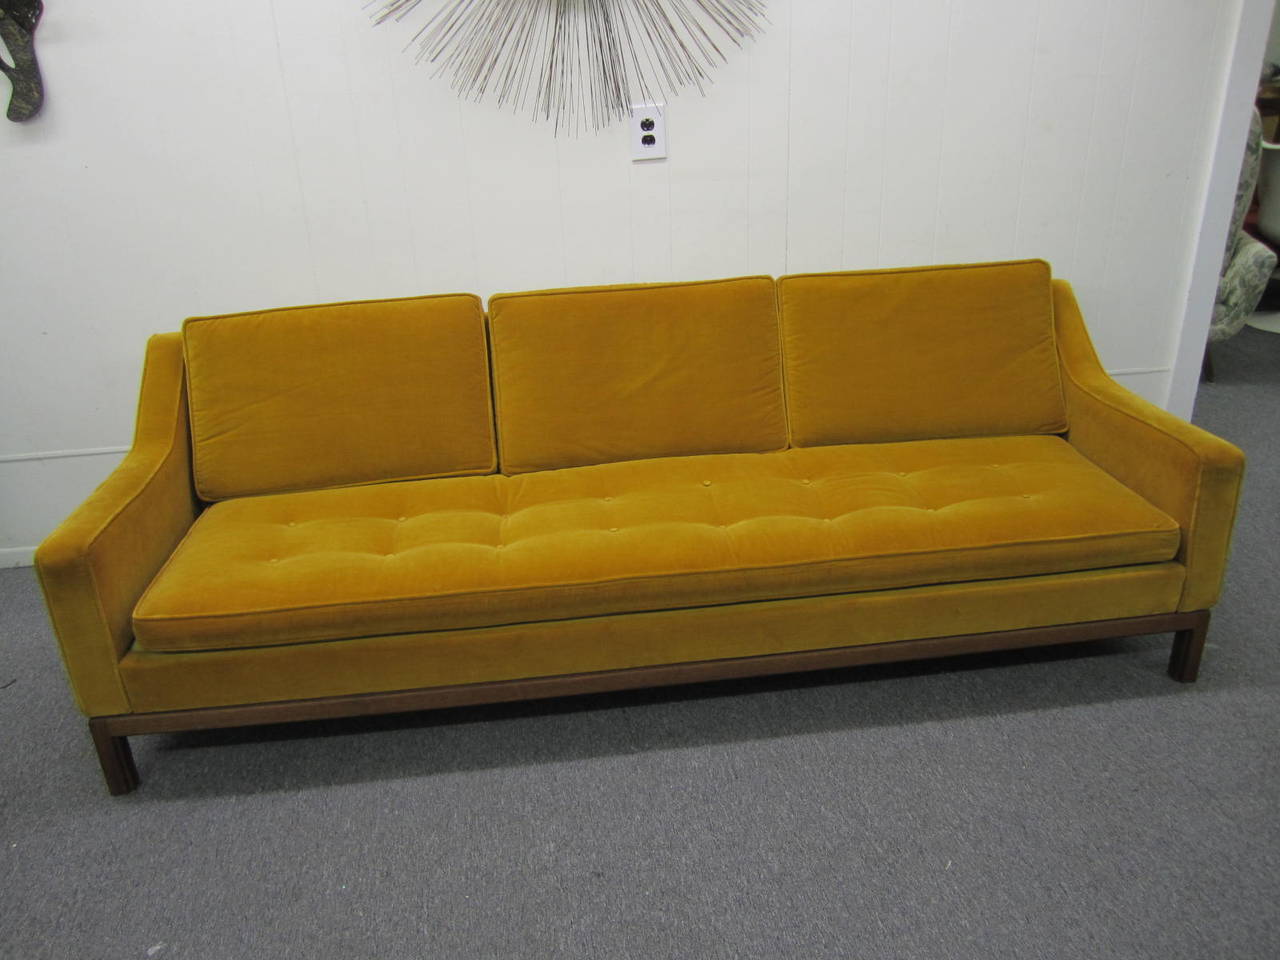 Jens Risom sofa, by Jens Risom Design Inc., USA, walnut frame with carved detail to legs, original orange velvet upholstery with tufted seat cushions and sloped arms, Risom label, 90